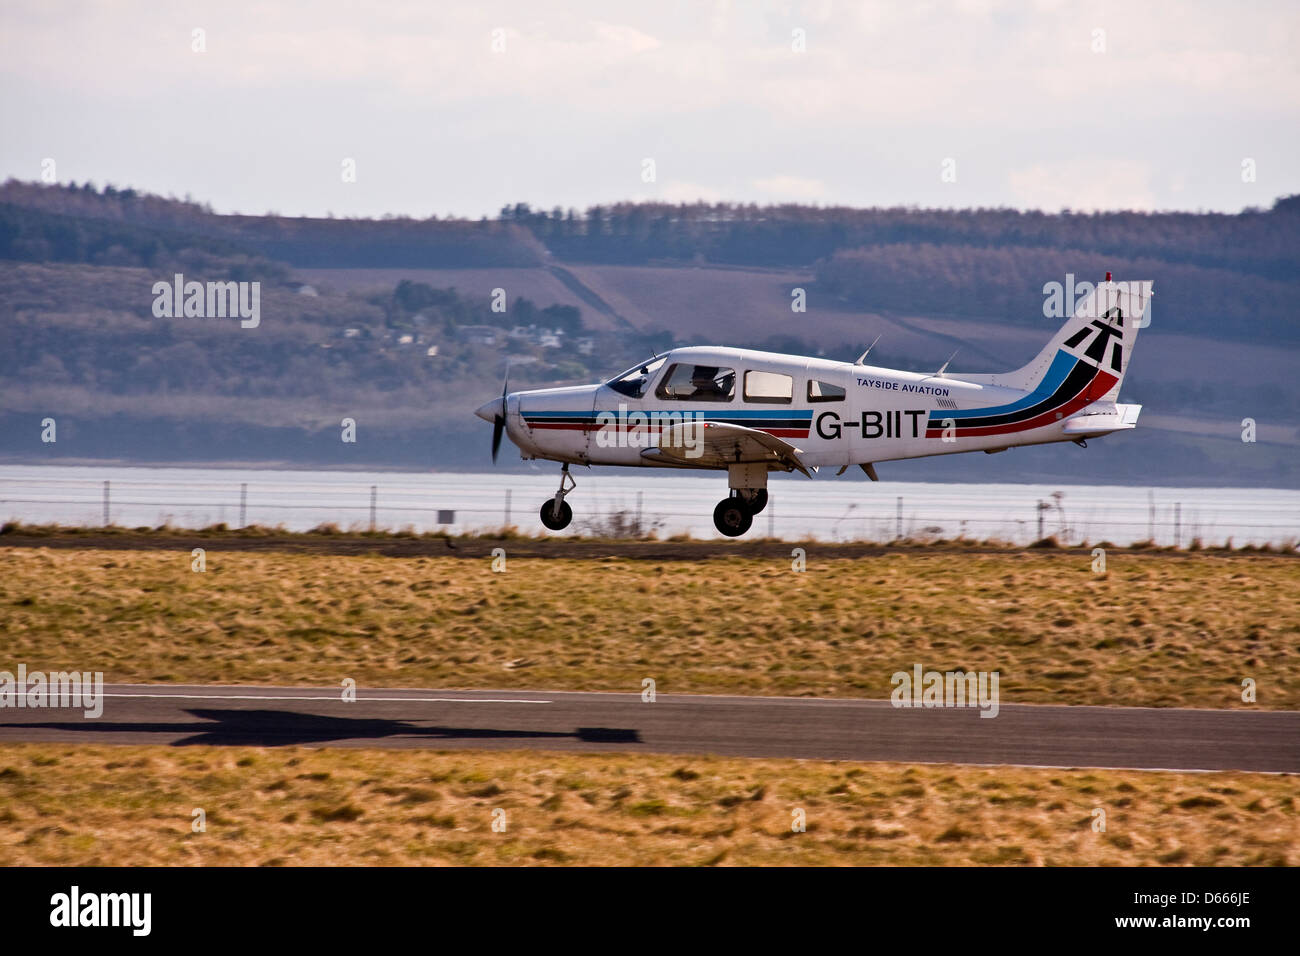 Tayside Aviation Piper PA-28 Warrior G-BIIT aircraft landing on the runway at Dundee Airport,UK Stock Photo